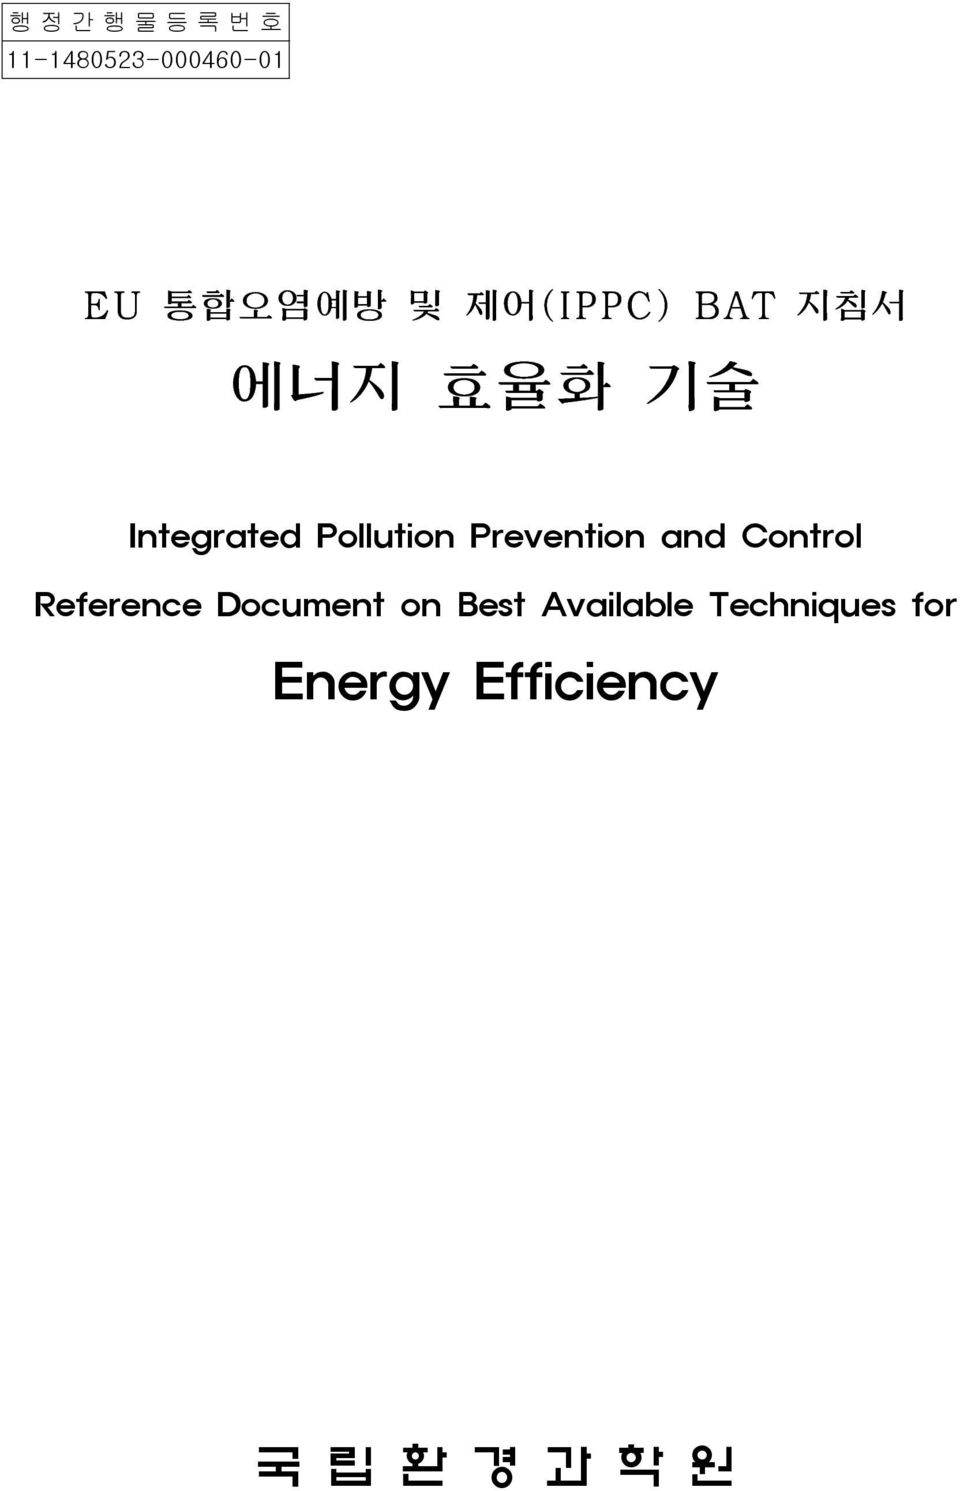 Prevention and Control Reference Document on Best